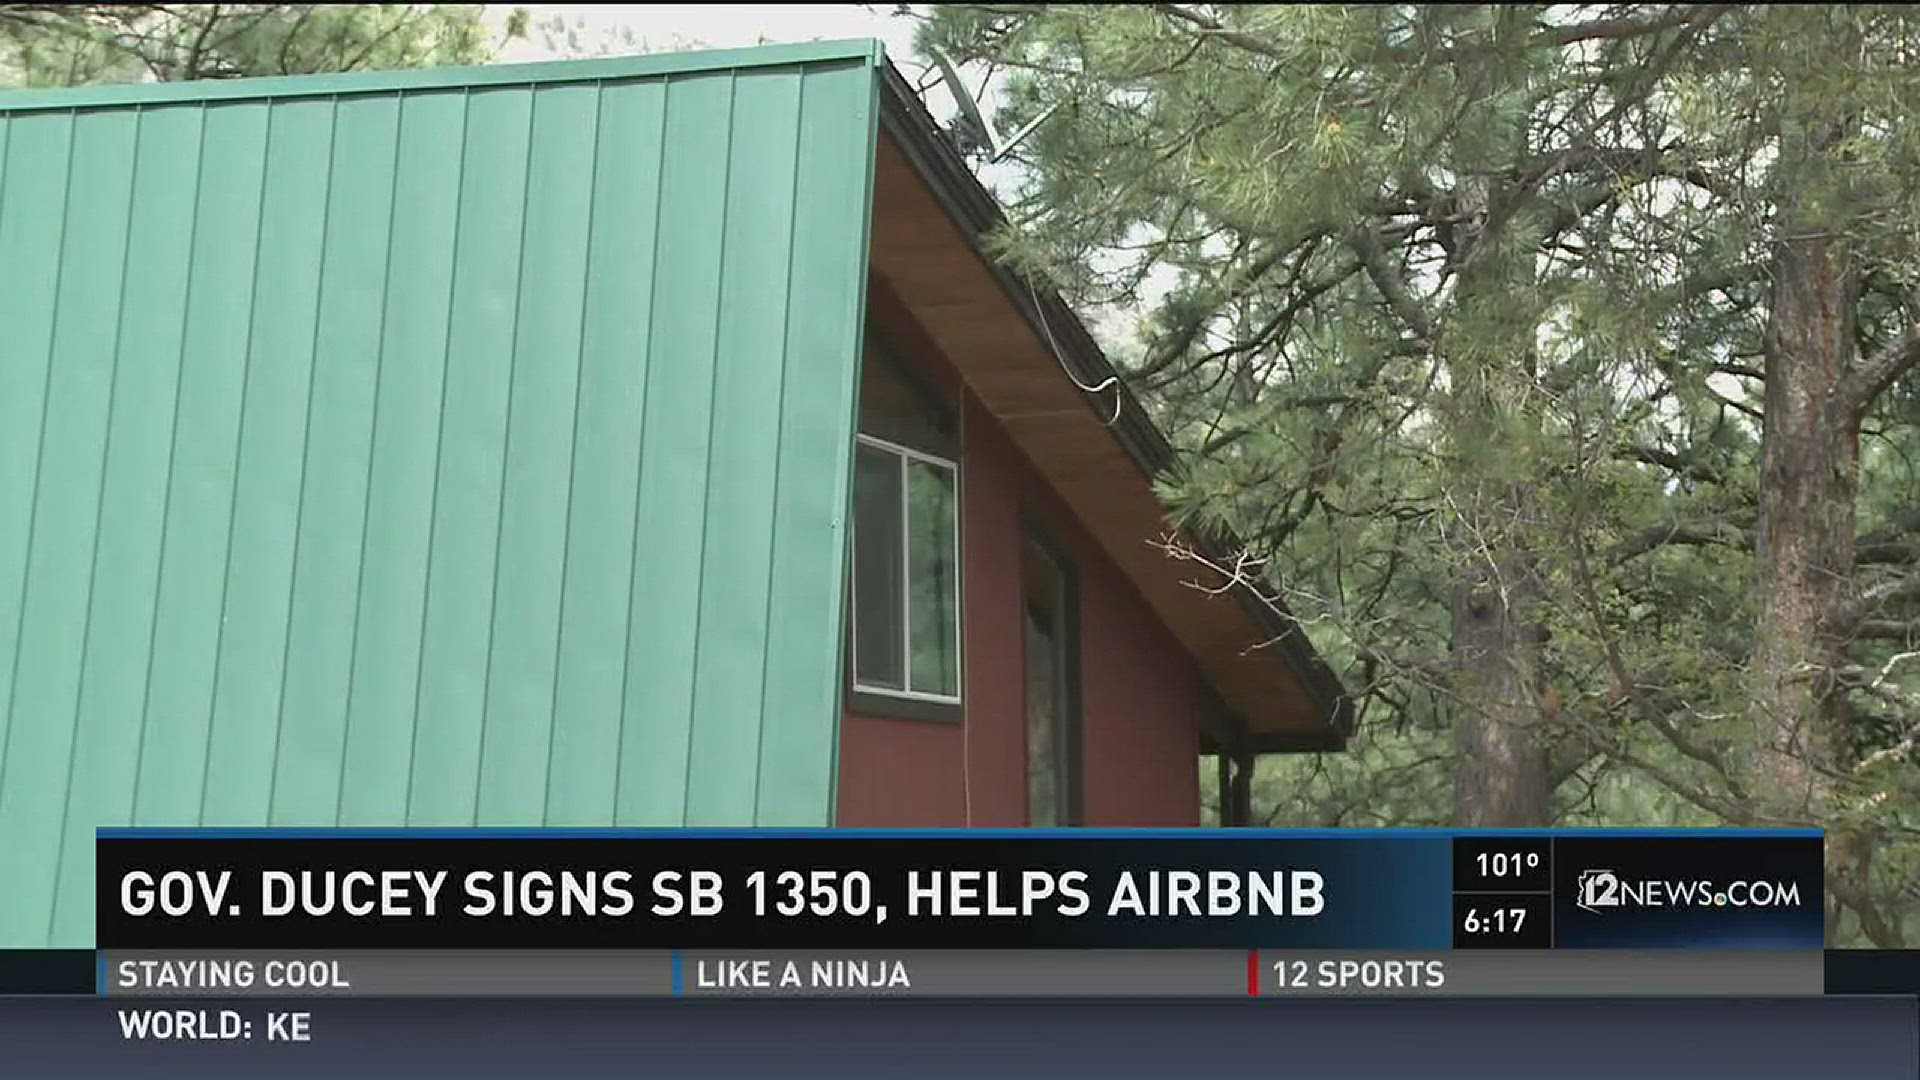 Governor Doug Ducey signed a bill to expand AIRBNB in the state of Arizona